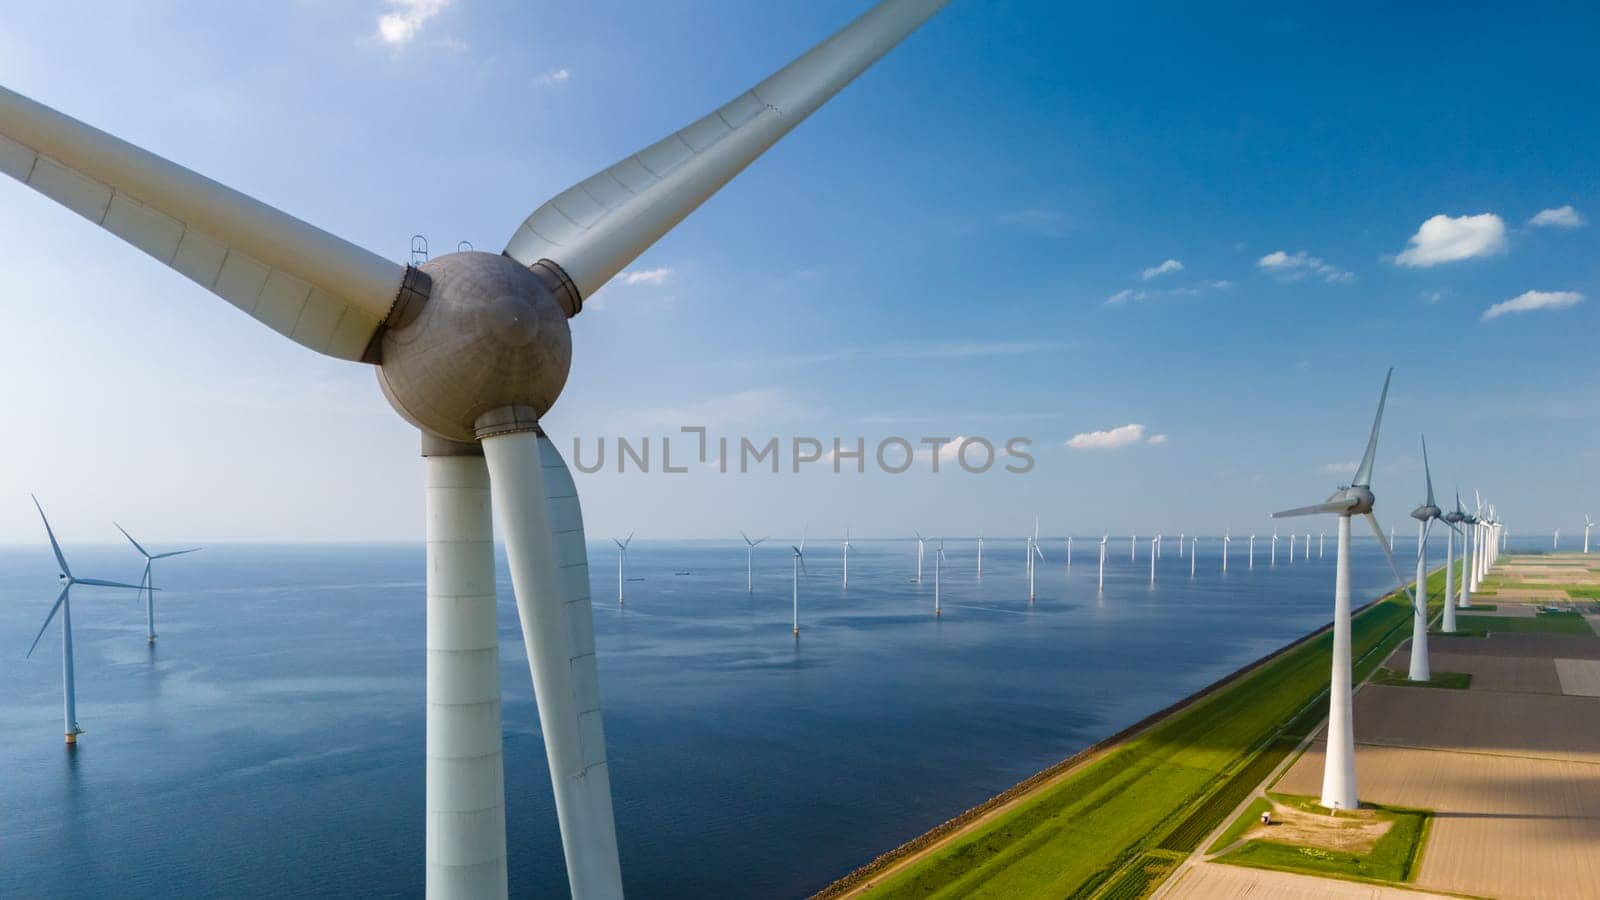 Aerial view of windmill turbines spinning gracefully in a wind farm near the ocean in the Netherlands Flevoland by fokkebok